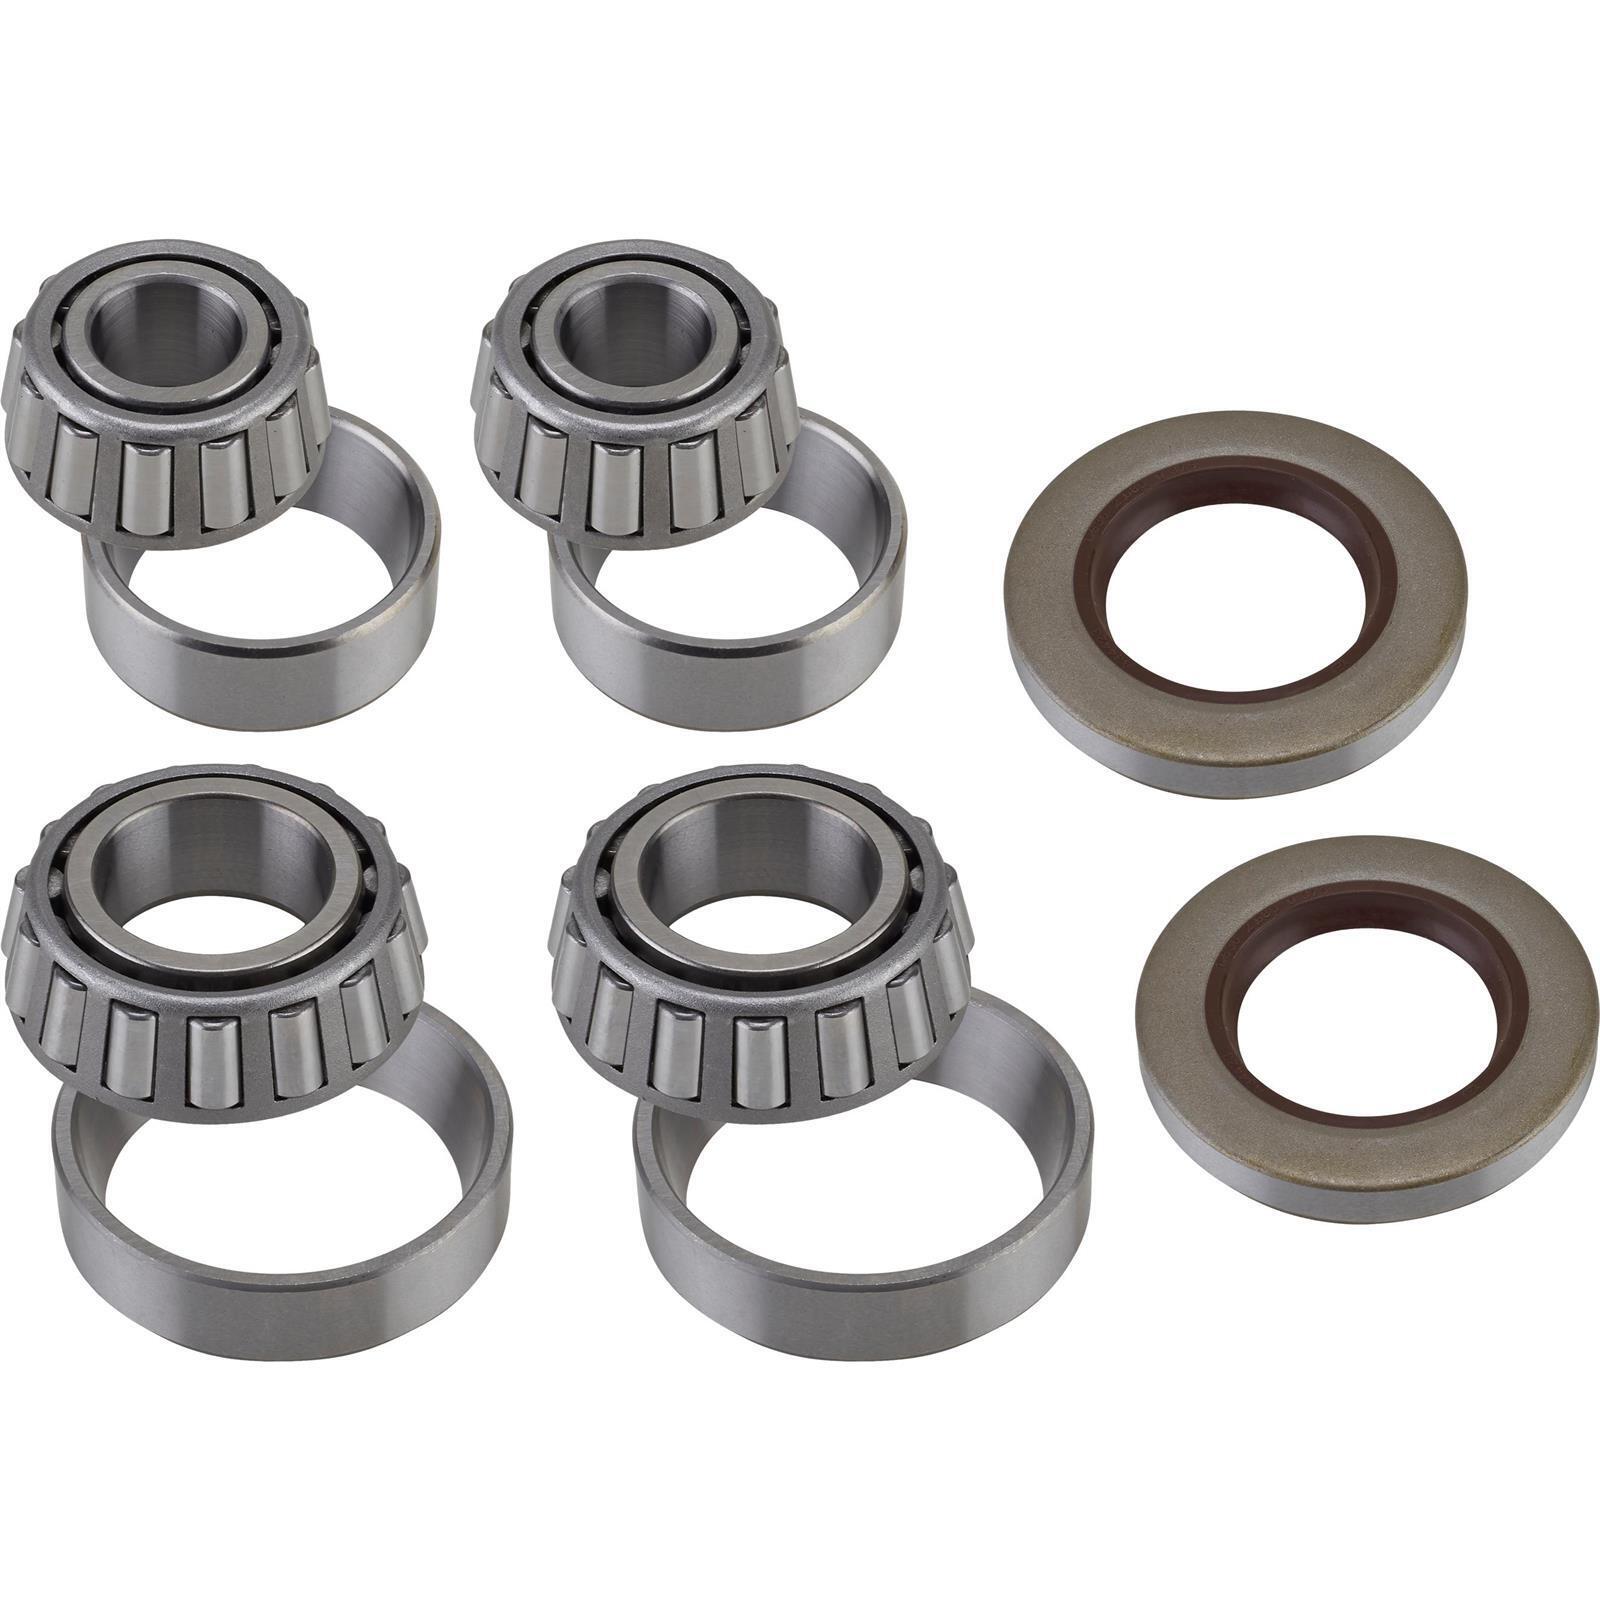 Wheel Bearing Kit for Front Hubs, Fits Ford Early